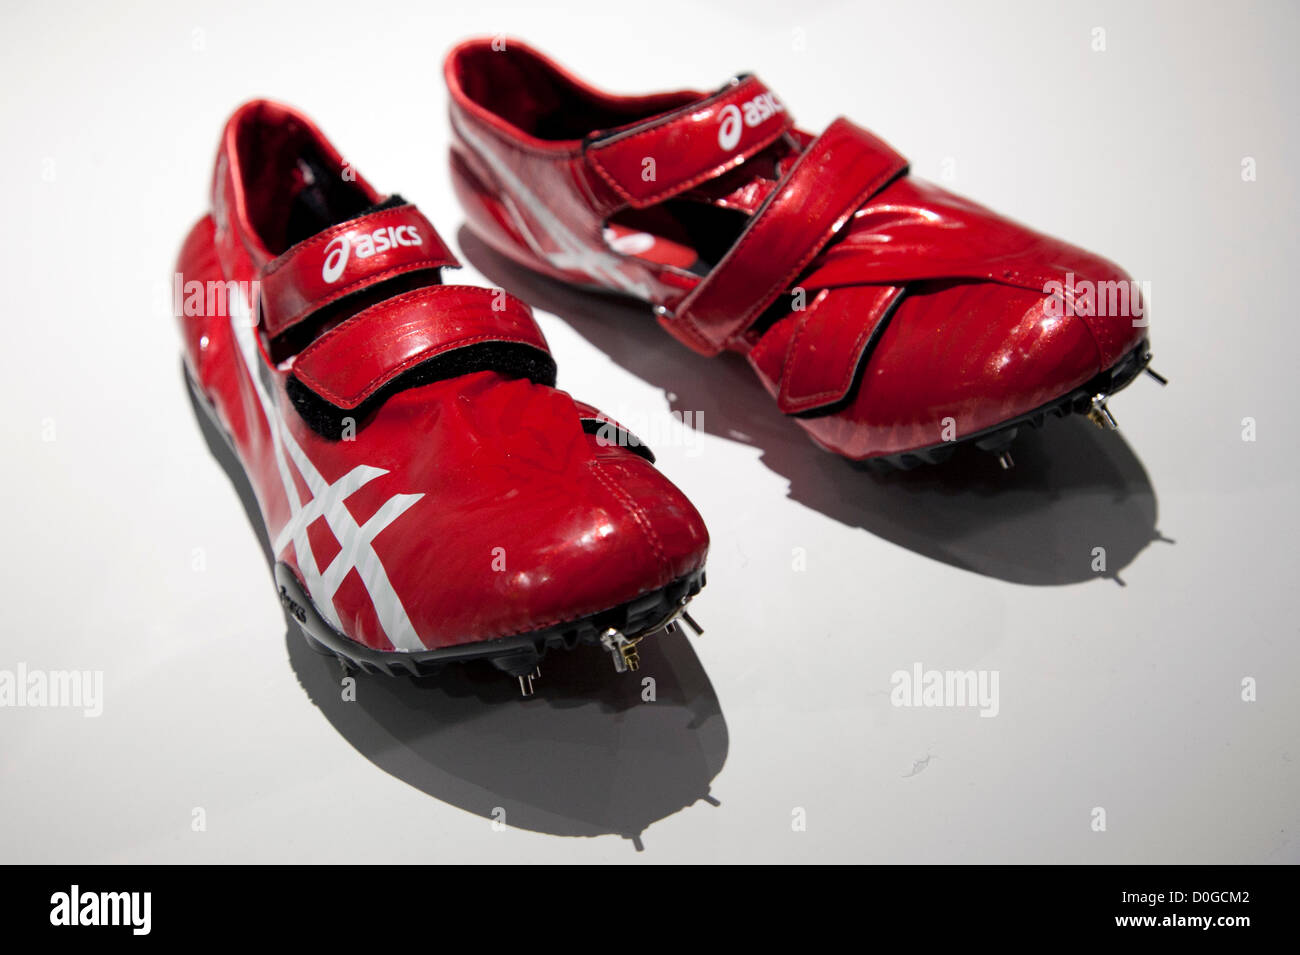 November 25, 2012, Tokyo, Japan - The soccer boots Lethal Stats by Asics at  Good Design Best exhibition. Good Design Award 2012 displays 1,180 good  designs selected products of architecture, communication media